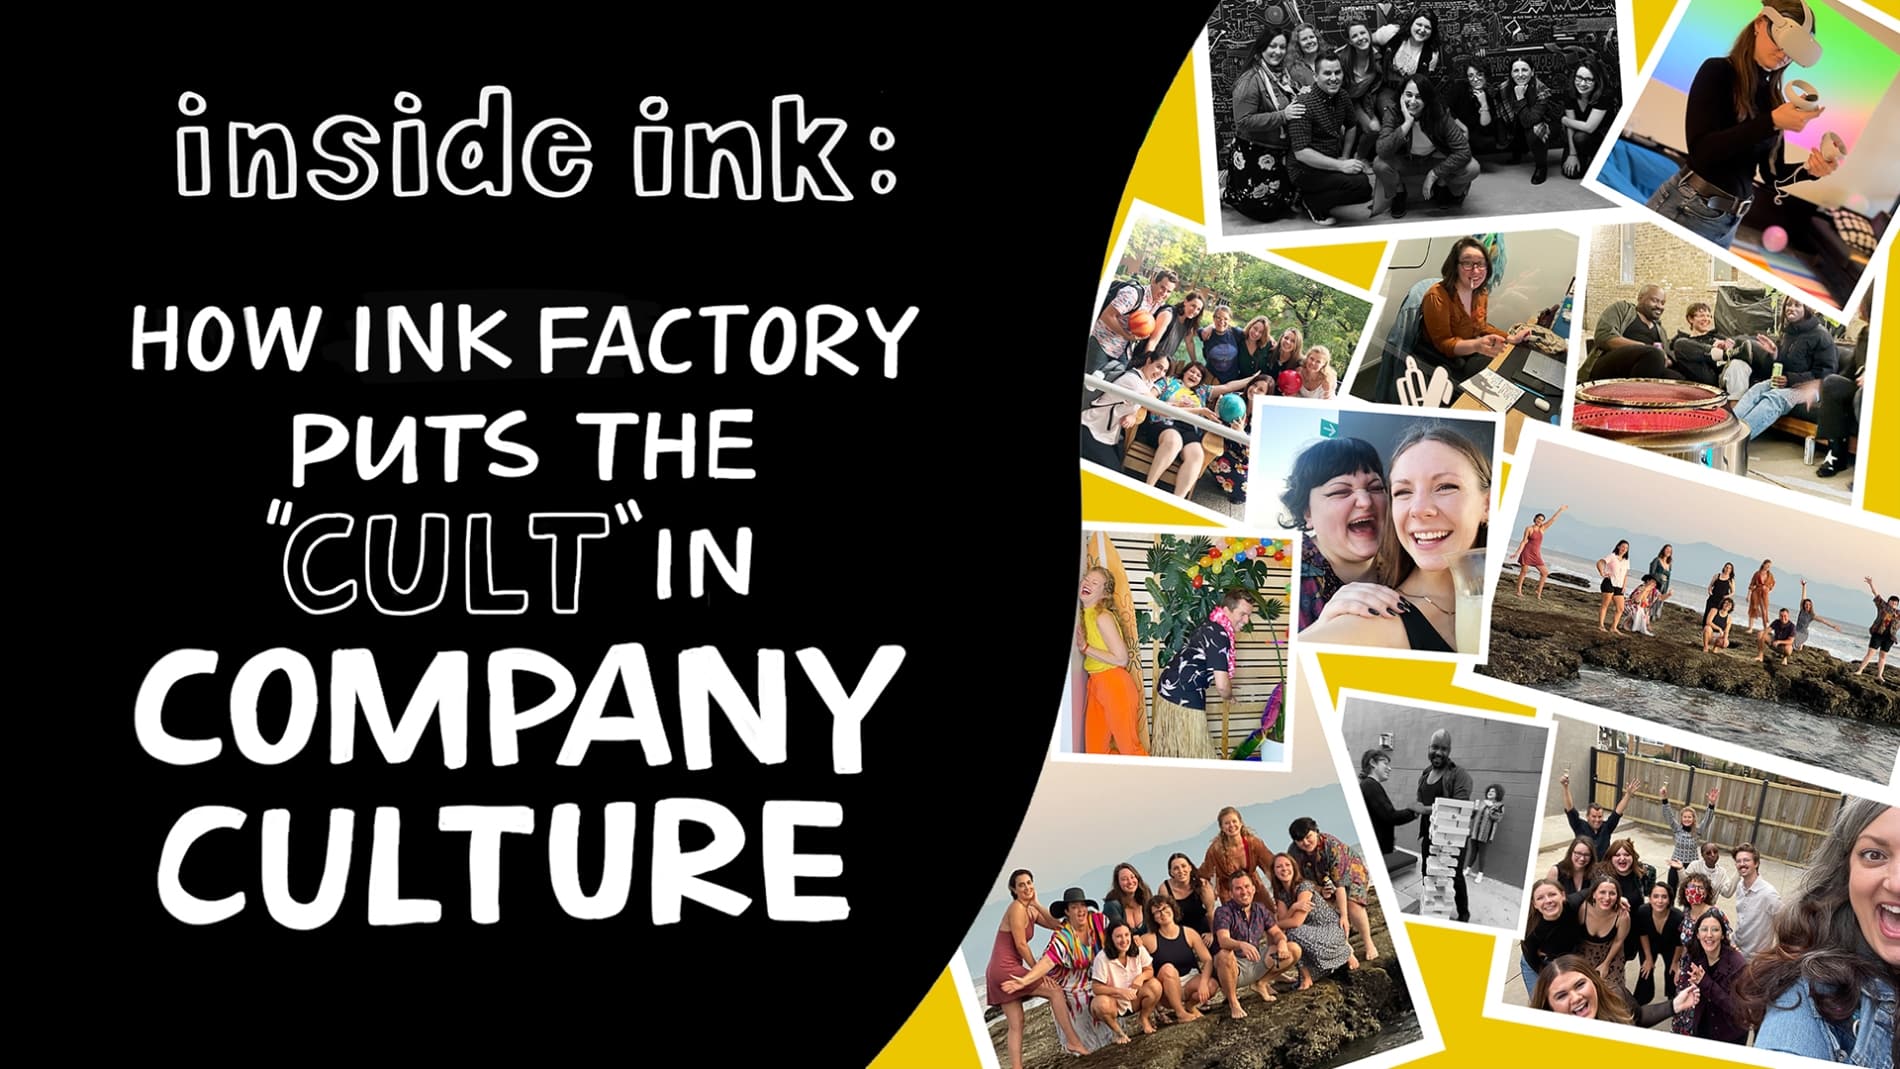 How Ink Factory Puts the “Cult” in “Company Culture”